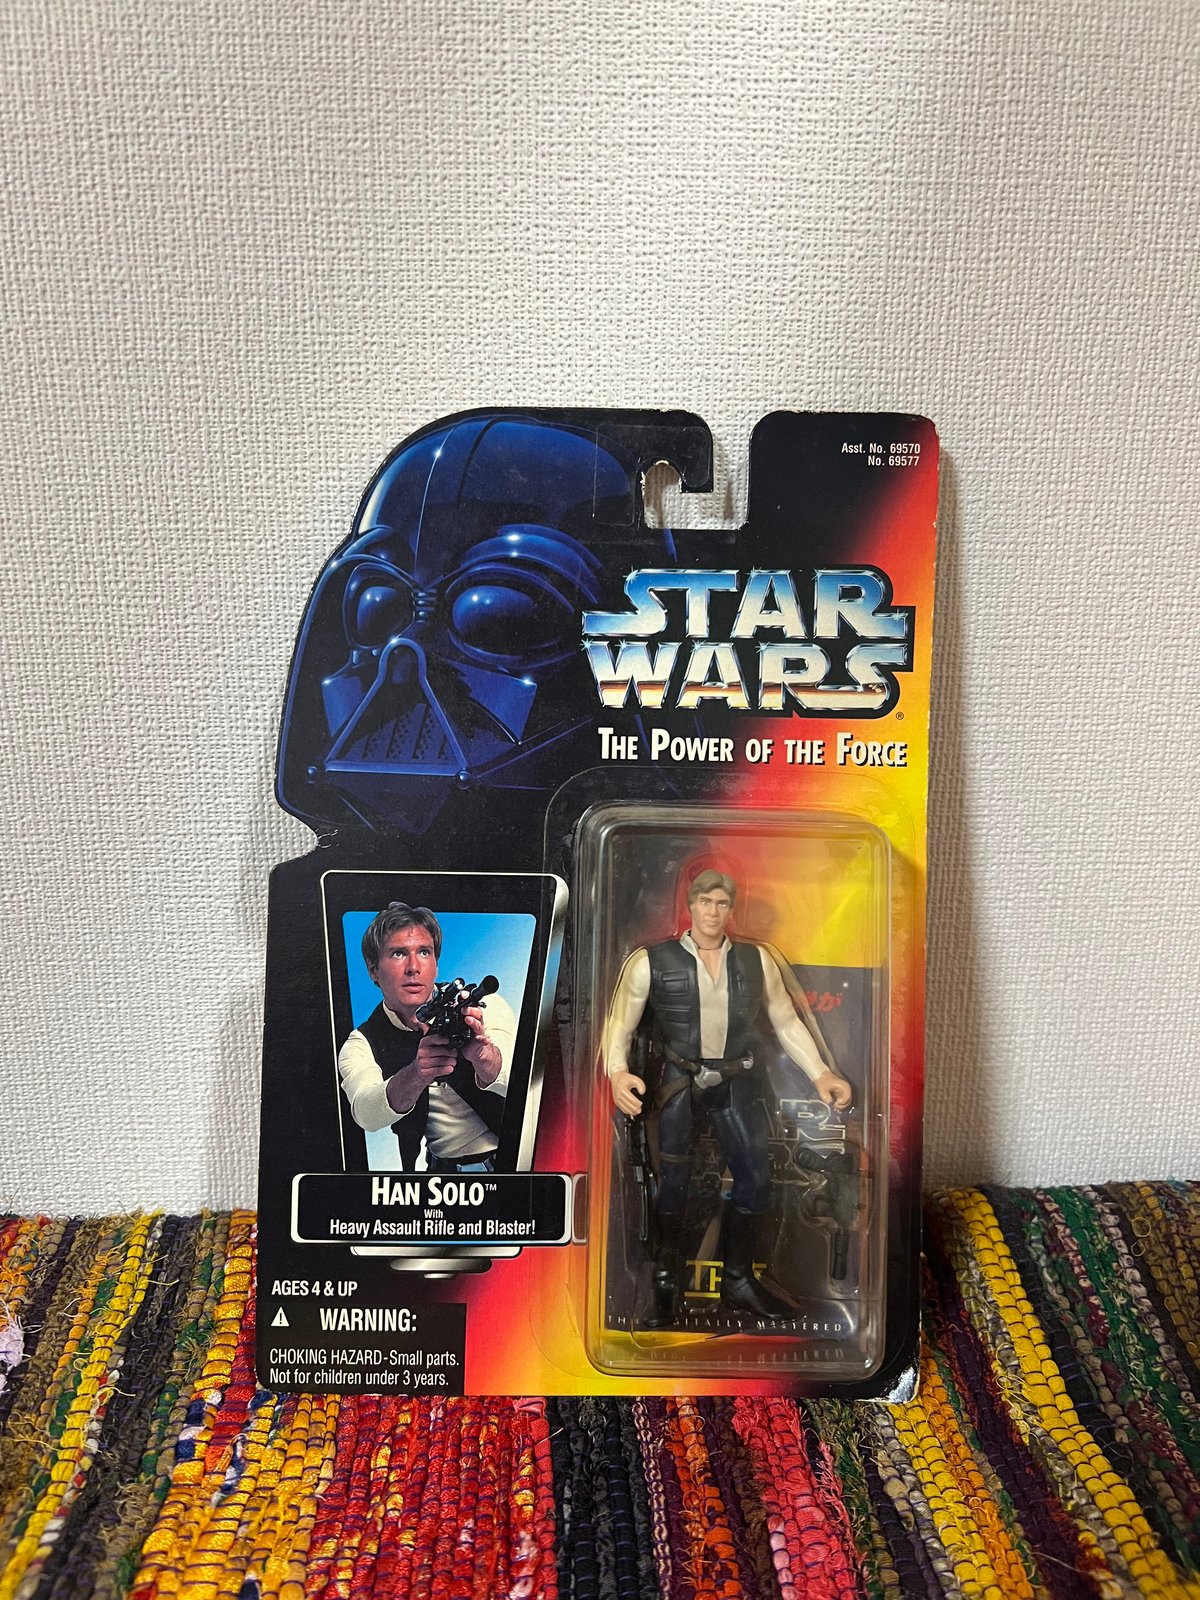 【STAR WARS】ハンソロ　BASIC FIGURE　THE POWER OF THE FORCE オレンジカード